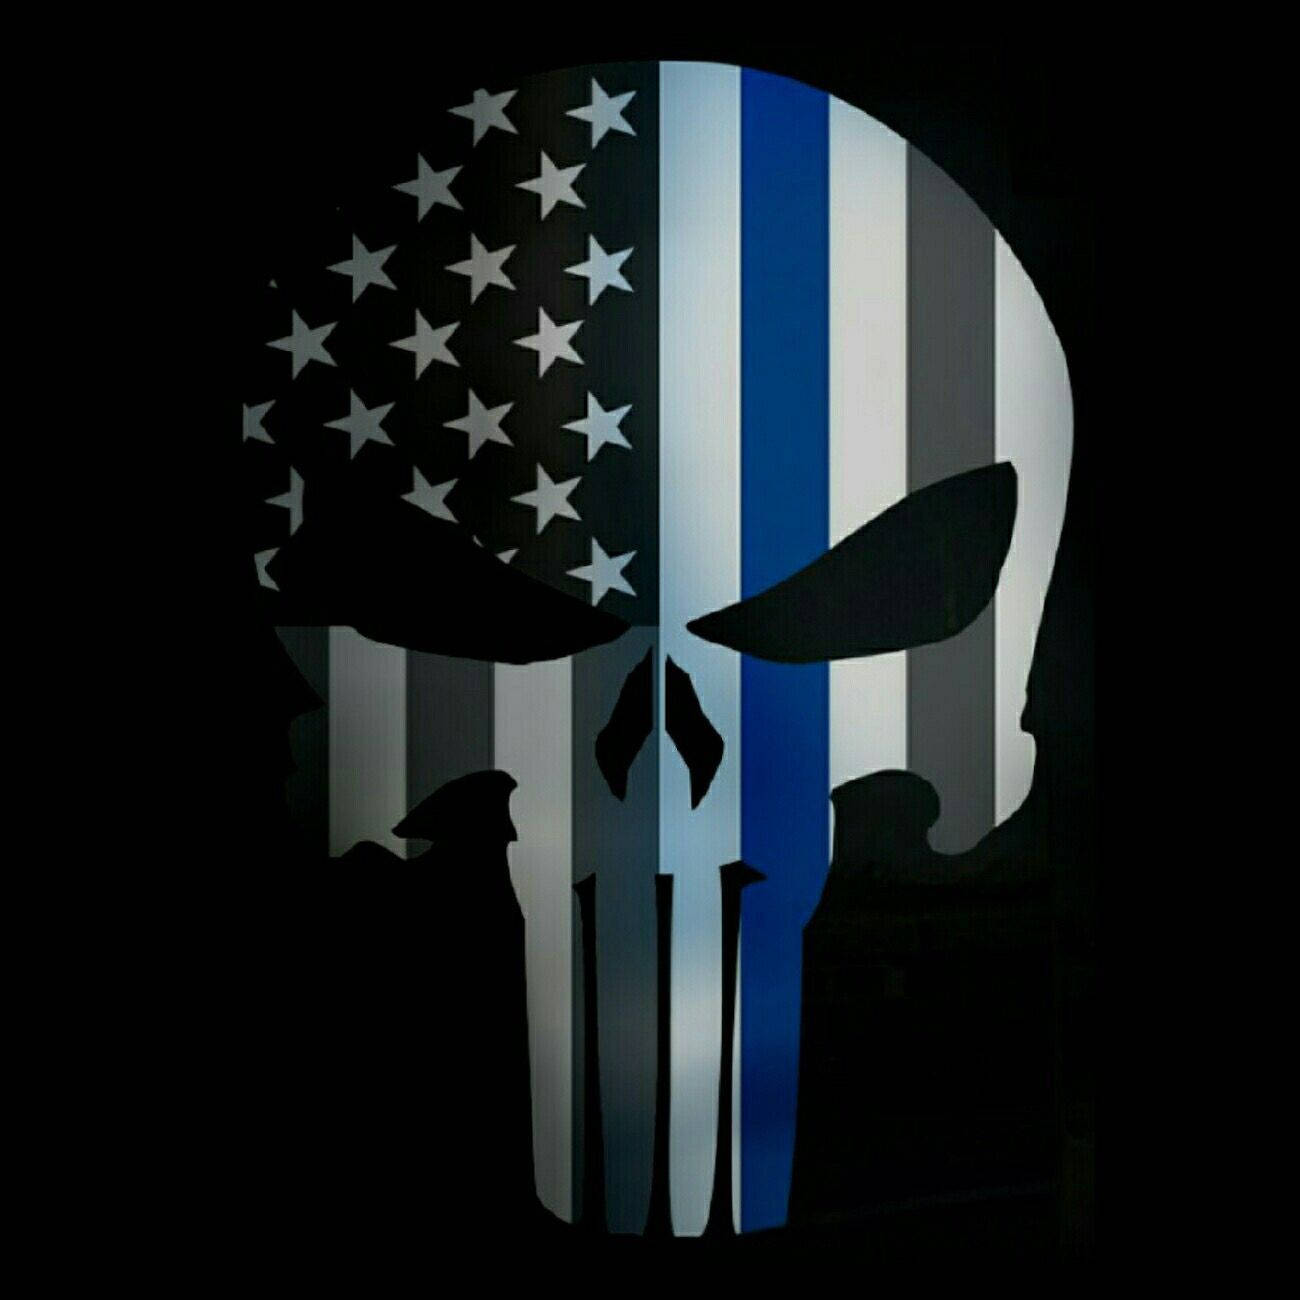 Show Your Support For The Thin Blue Line With This Punisher Inspired Skull Emblem